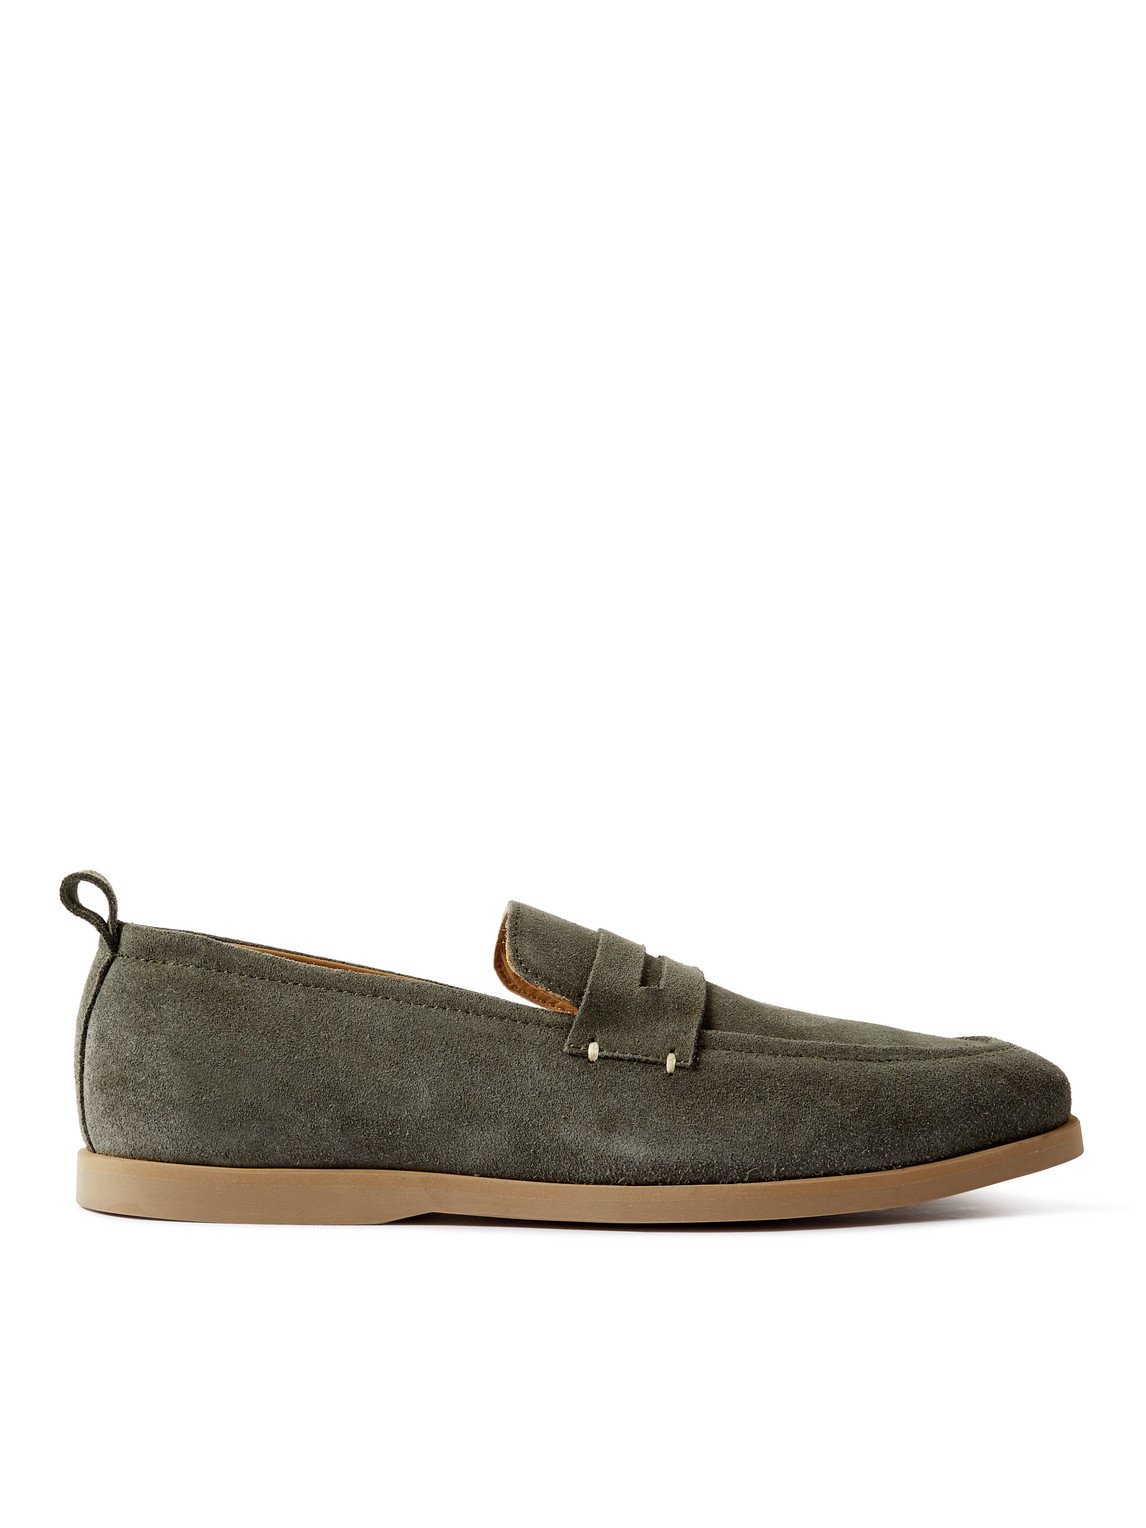 Mr P Regenerated Suede By Evolo® Penny Loafers In Green